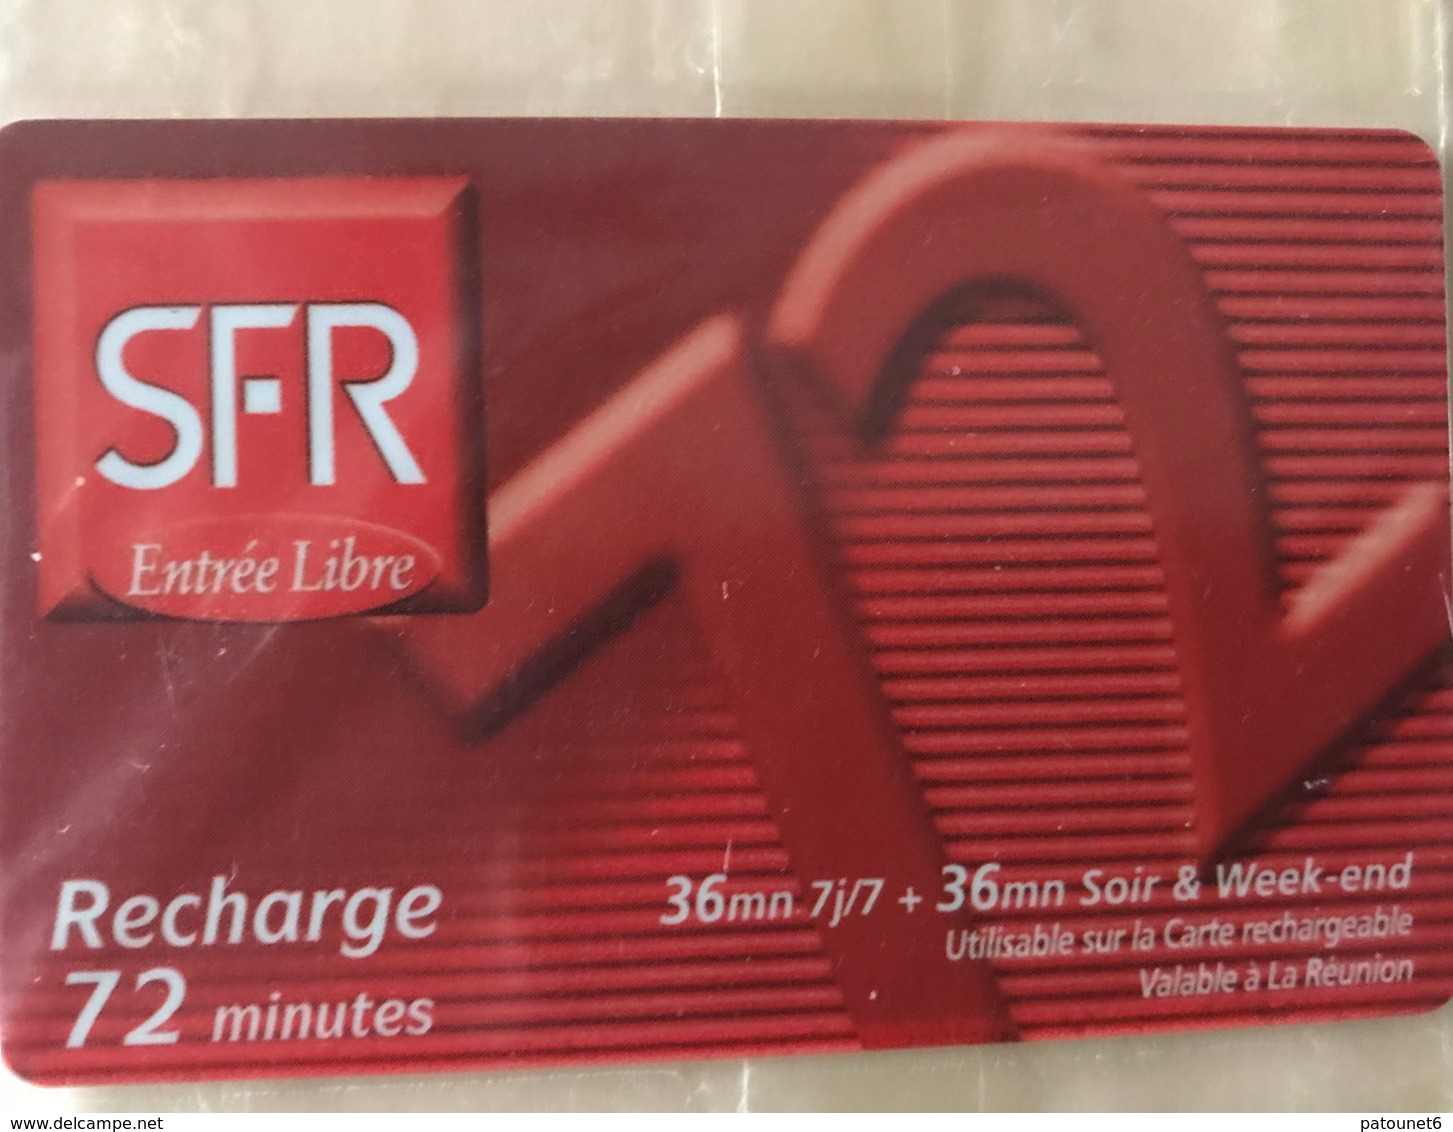 REUNION - Recharge SFR - 72 Minutes - Riunione